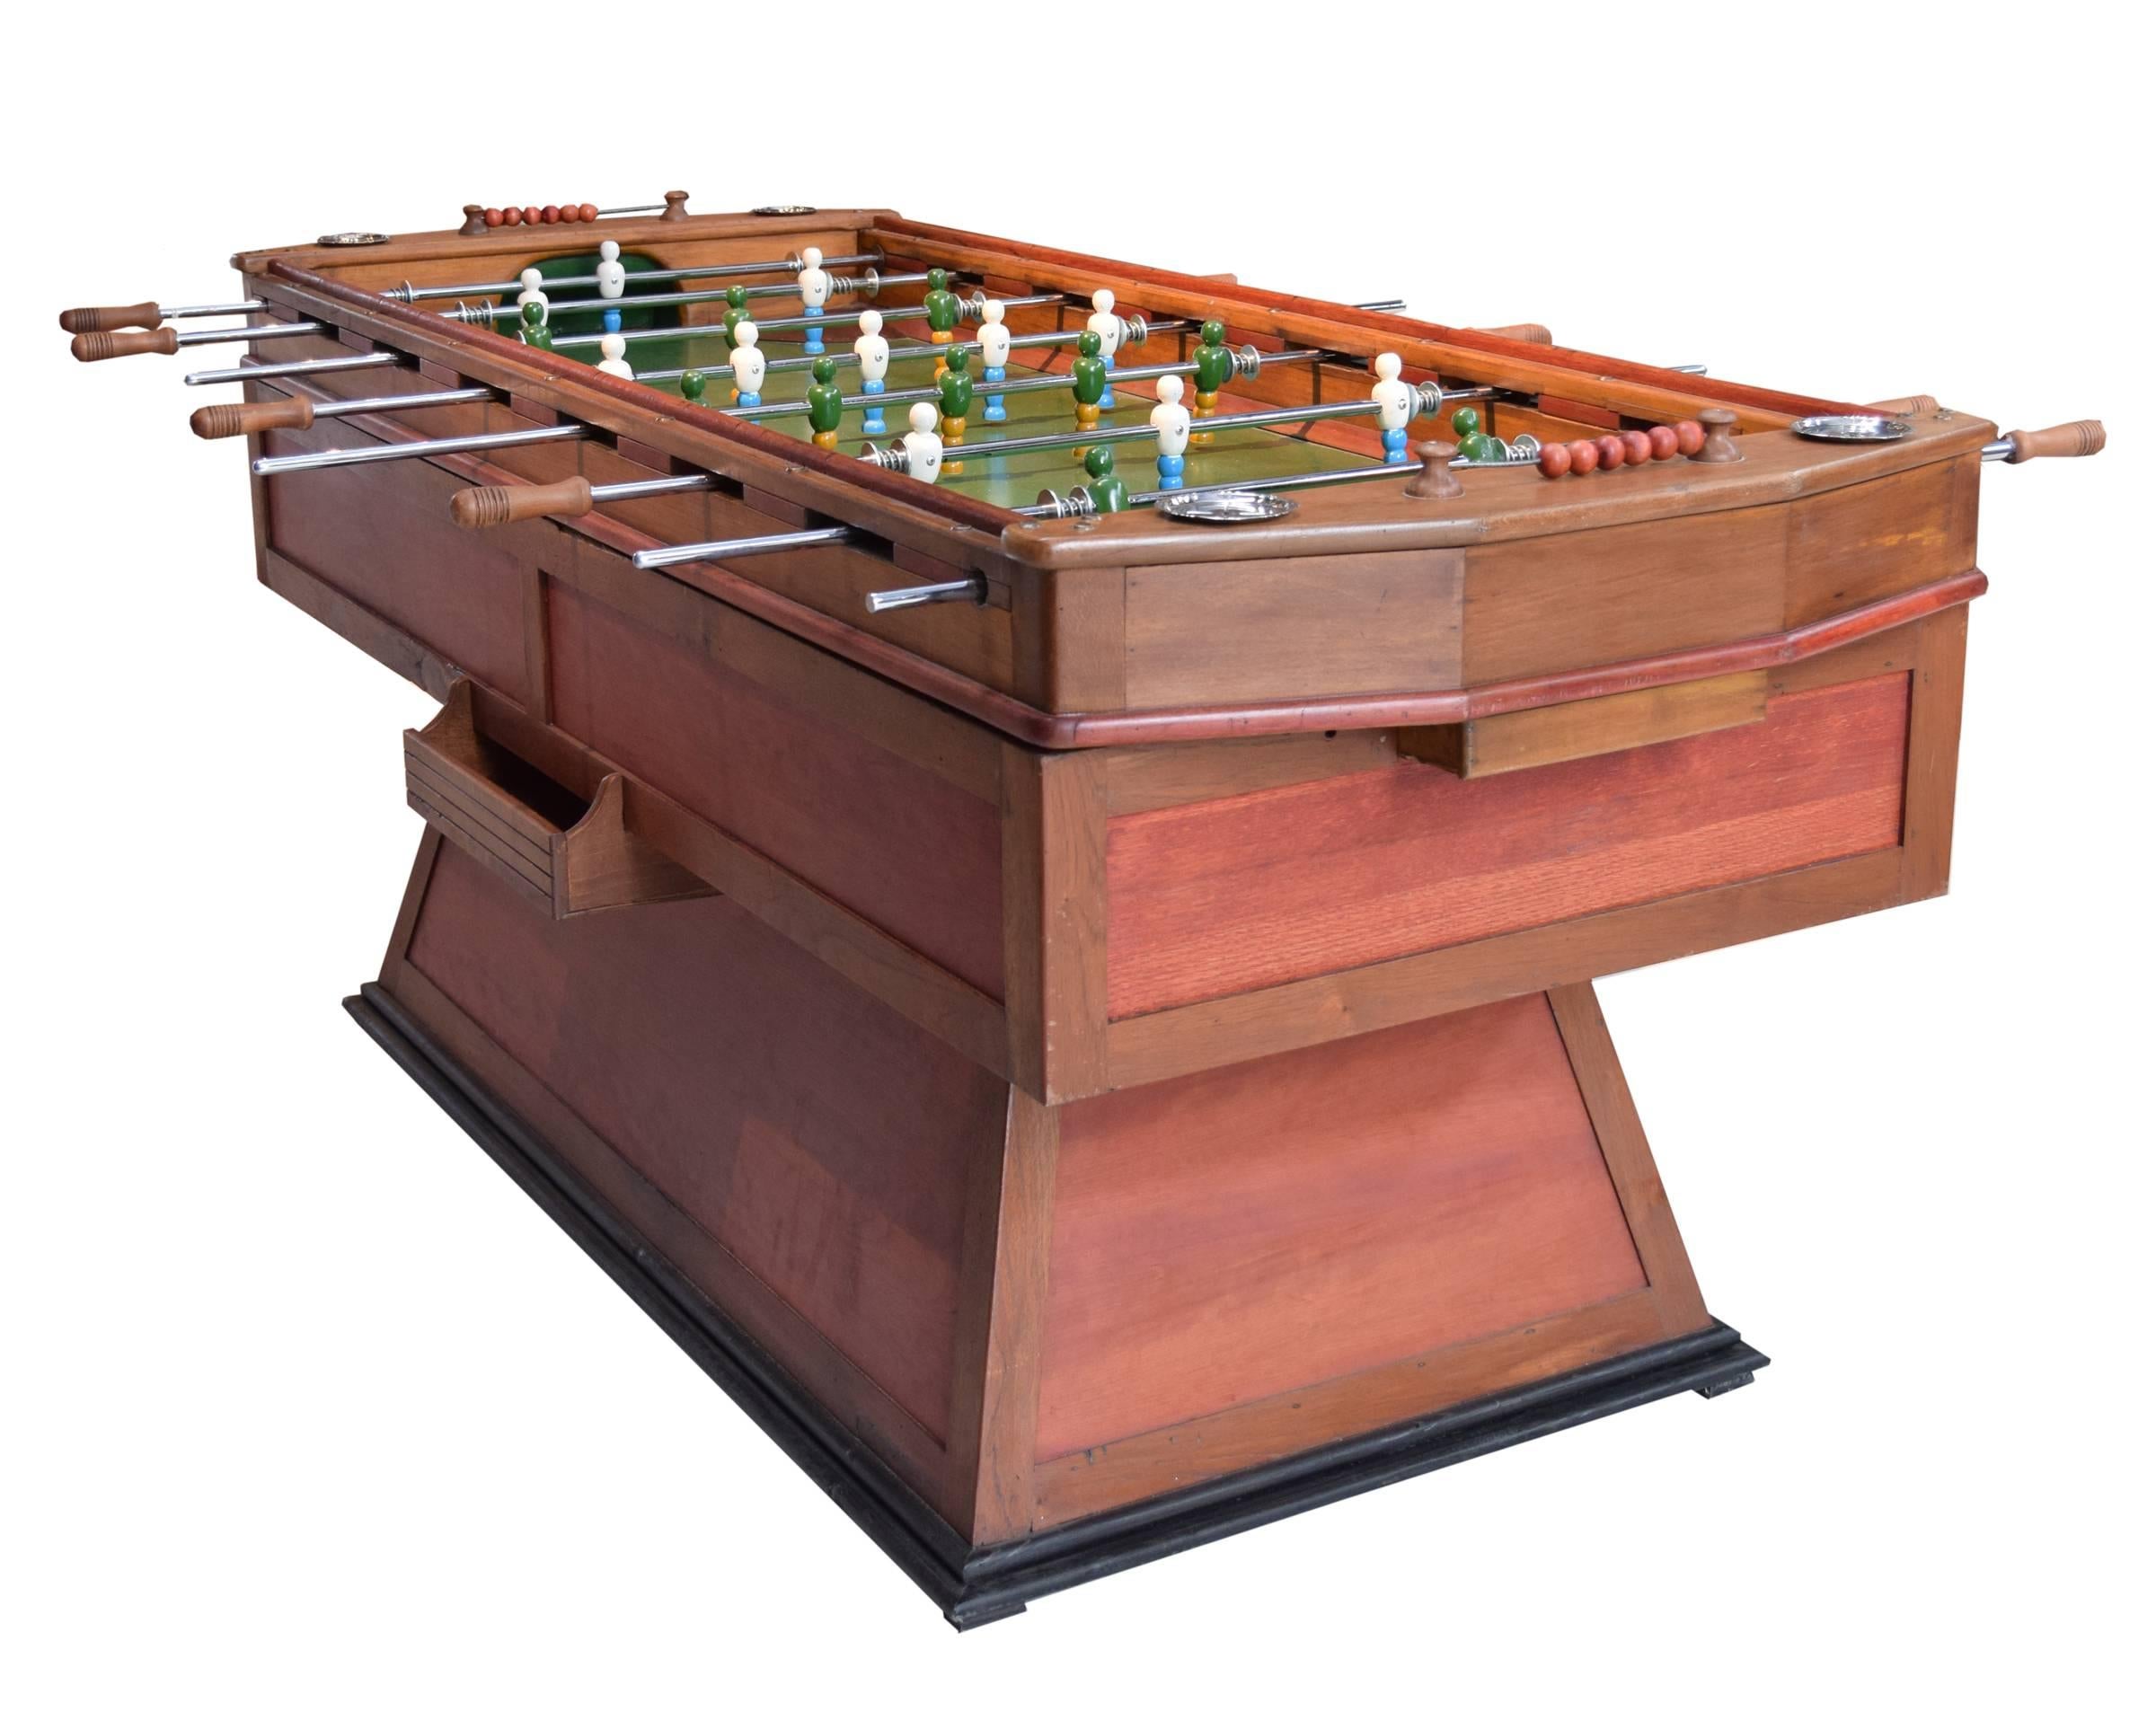 An Italian foosball table, circa 1925-1930, with an extra-long length. The coin operated table features painted wood players on metal rods that uniquely move in four directions. The table also boasts dual manual scoring systems and four ashtrays.